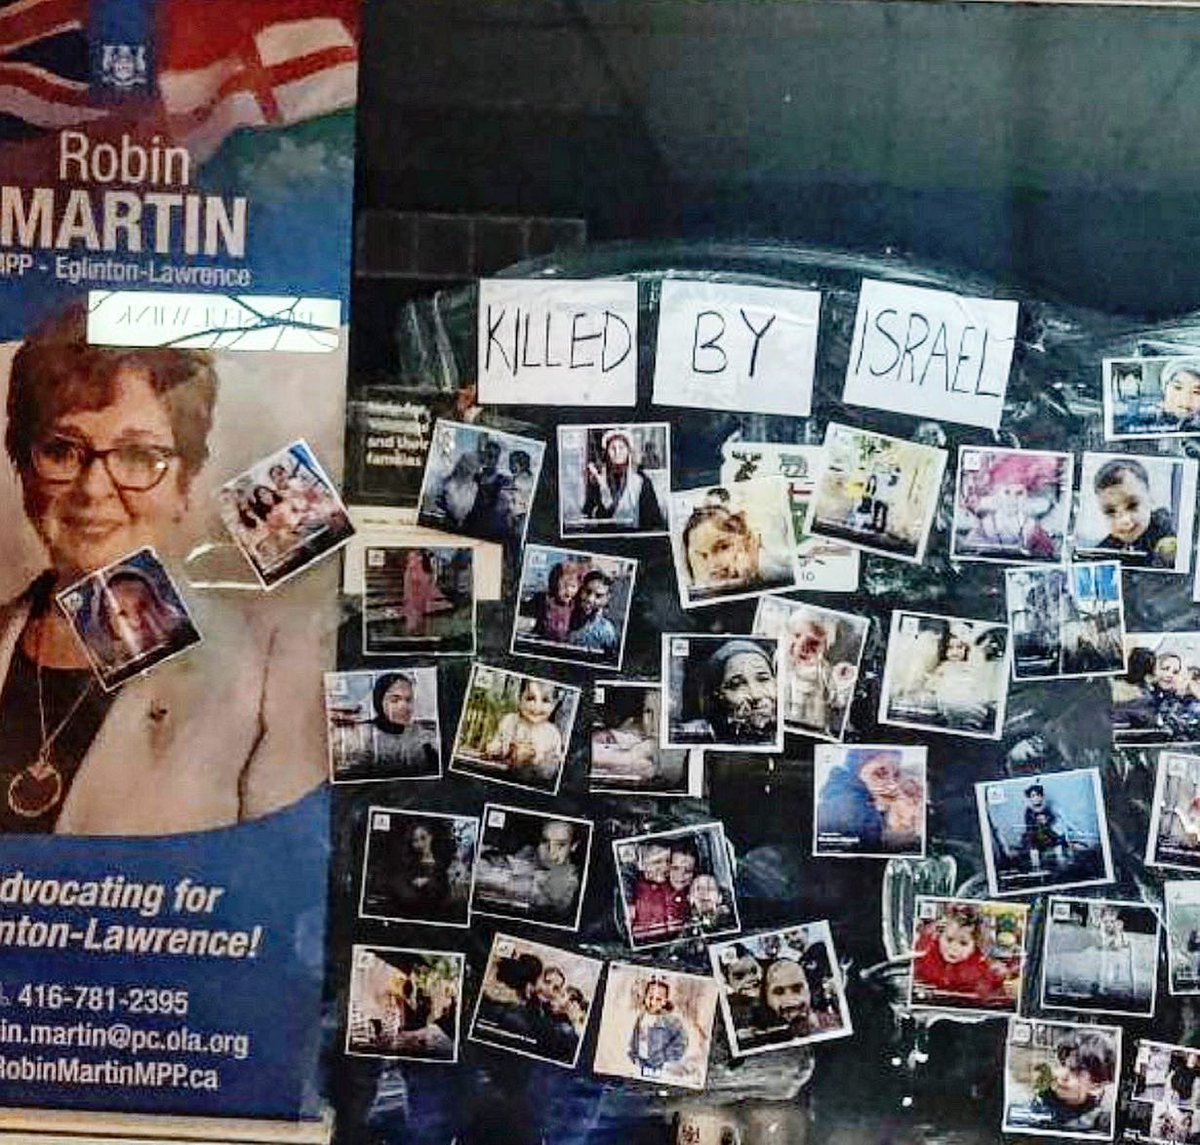 VILE: Pro Hamas thugs cowardly vandalize constituency office of Conservative MPP Robin Martin under the cover of darkness - hope you and your staff are ok @RobinMartinPC.